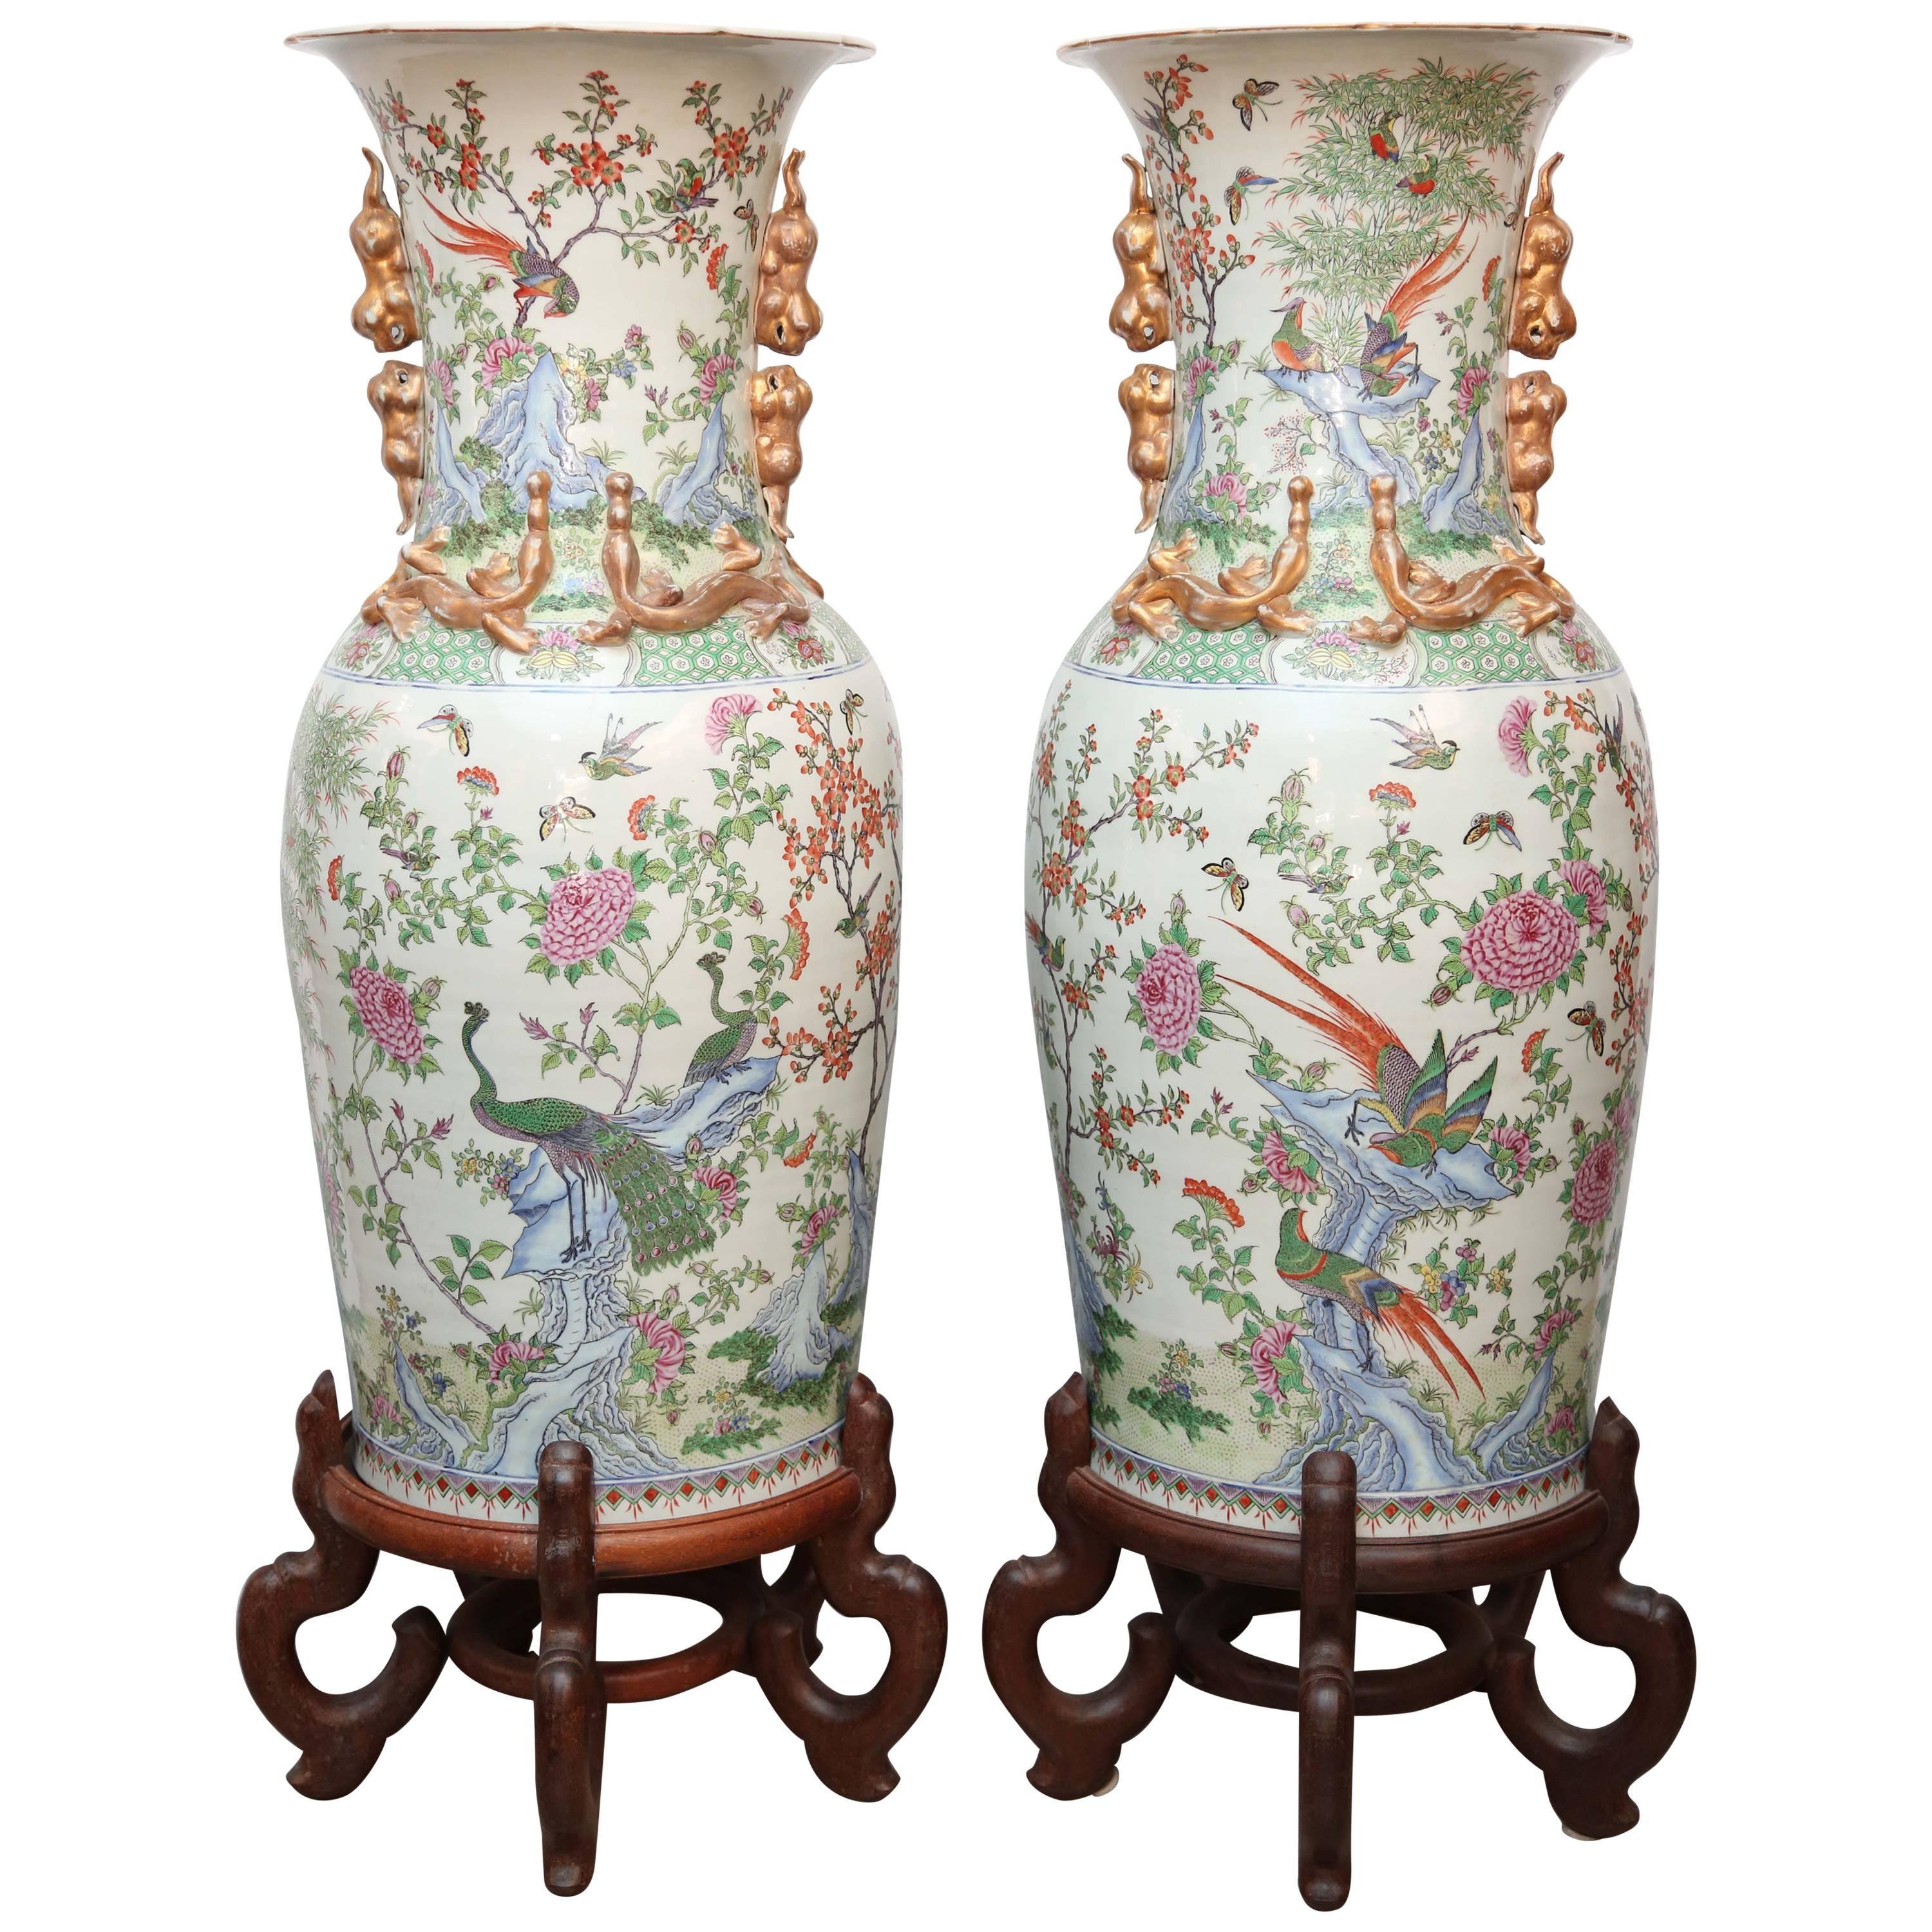 Pair of Chinese "Palace" Vases